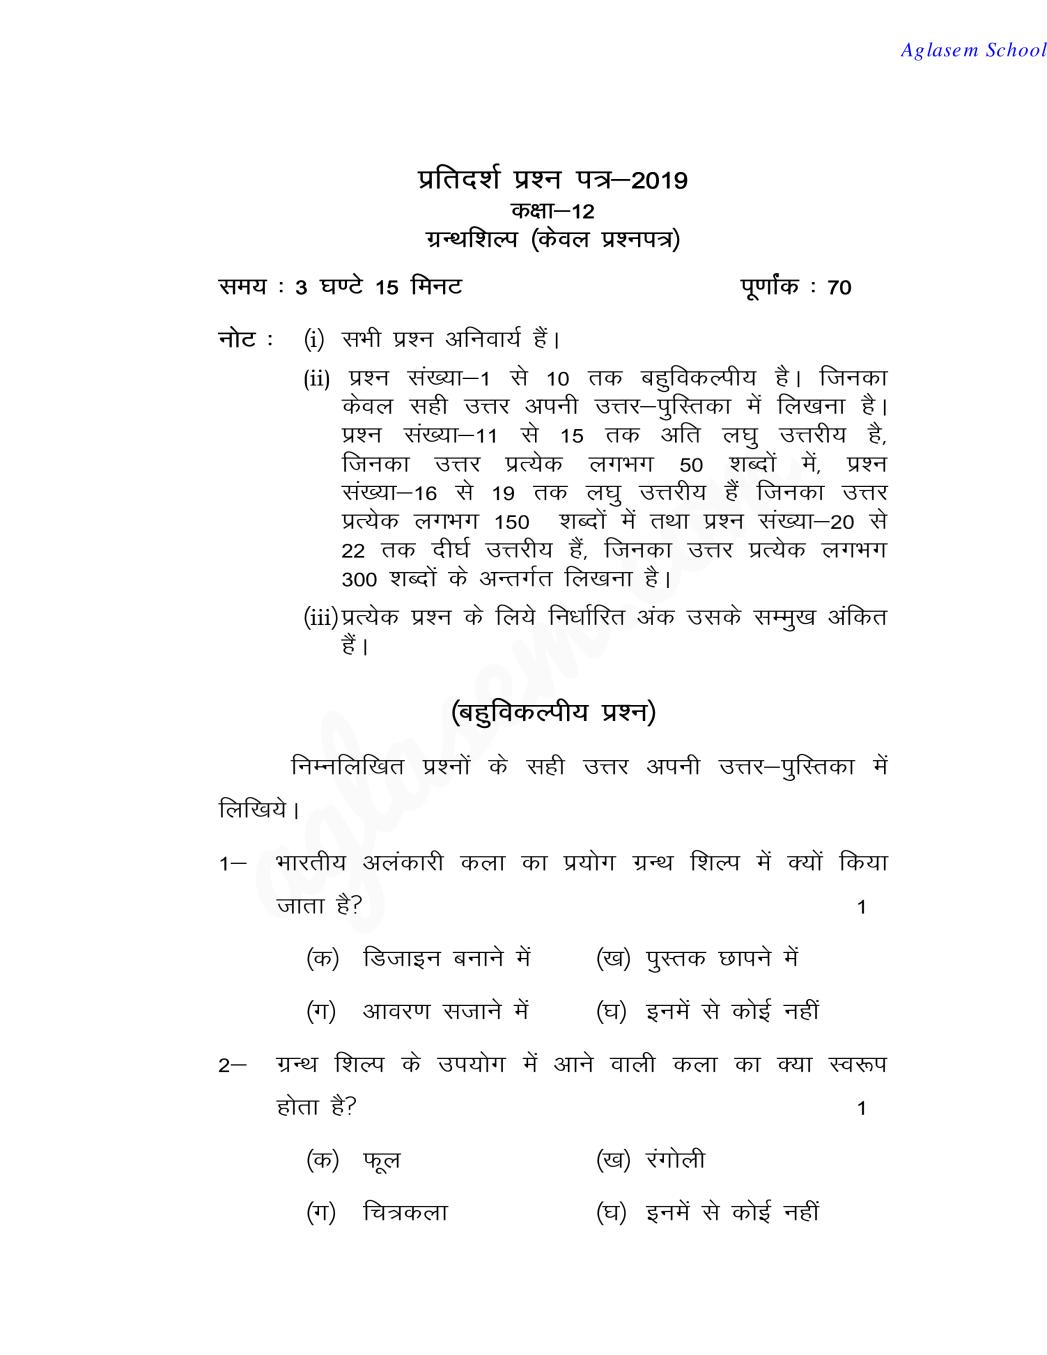 UP Board Class 12 Model Paper 2019 BOOK CRAFT - Page 1